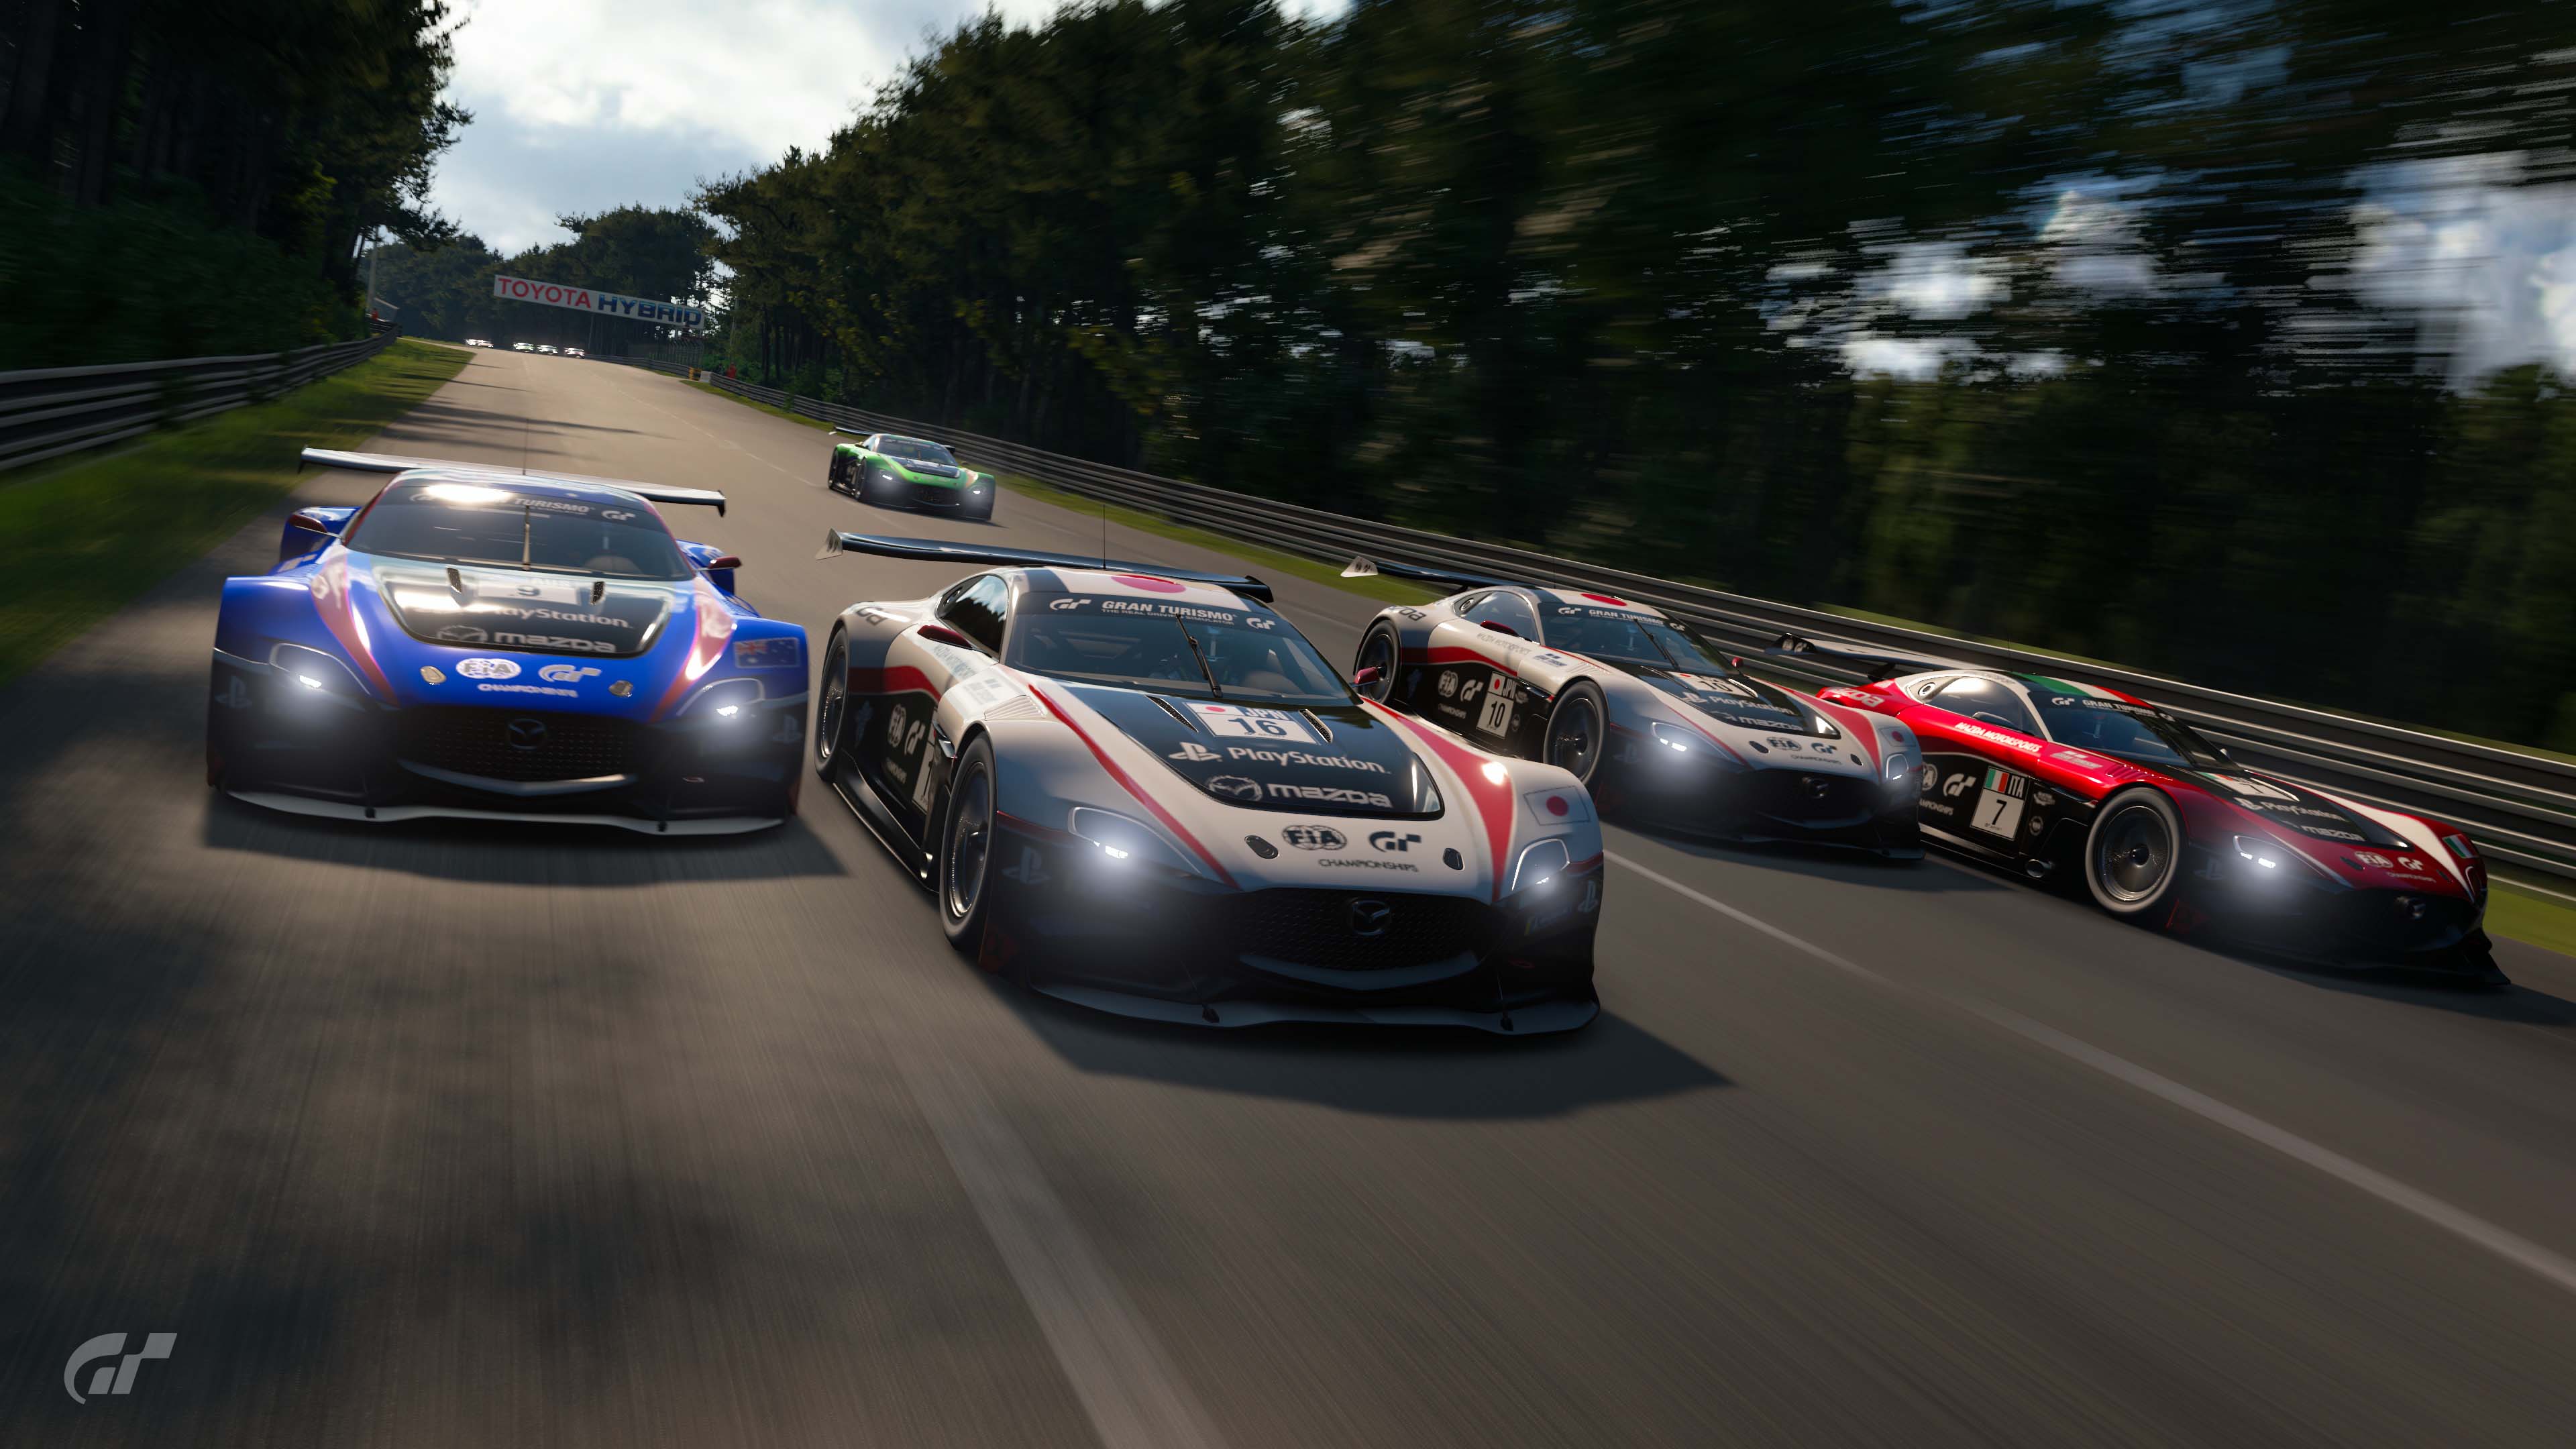 The Top 16 Players in the World Vie for the Ultimate Online Racing ...